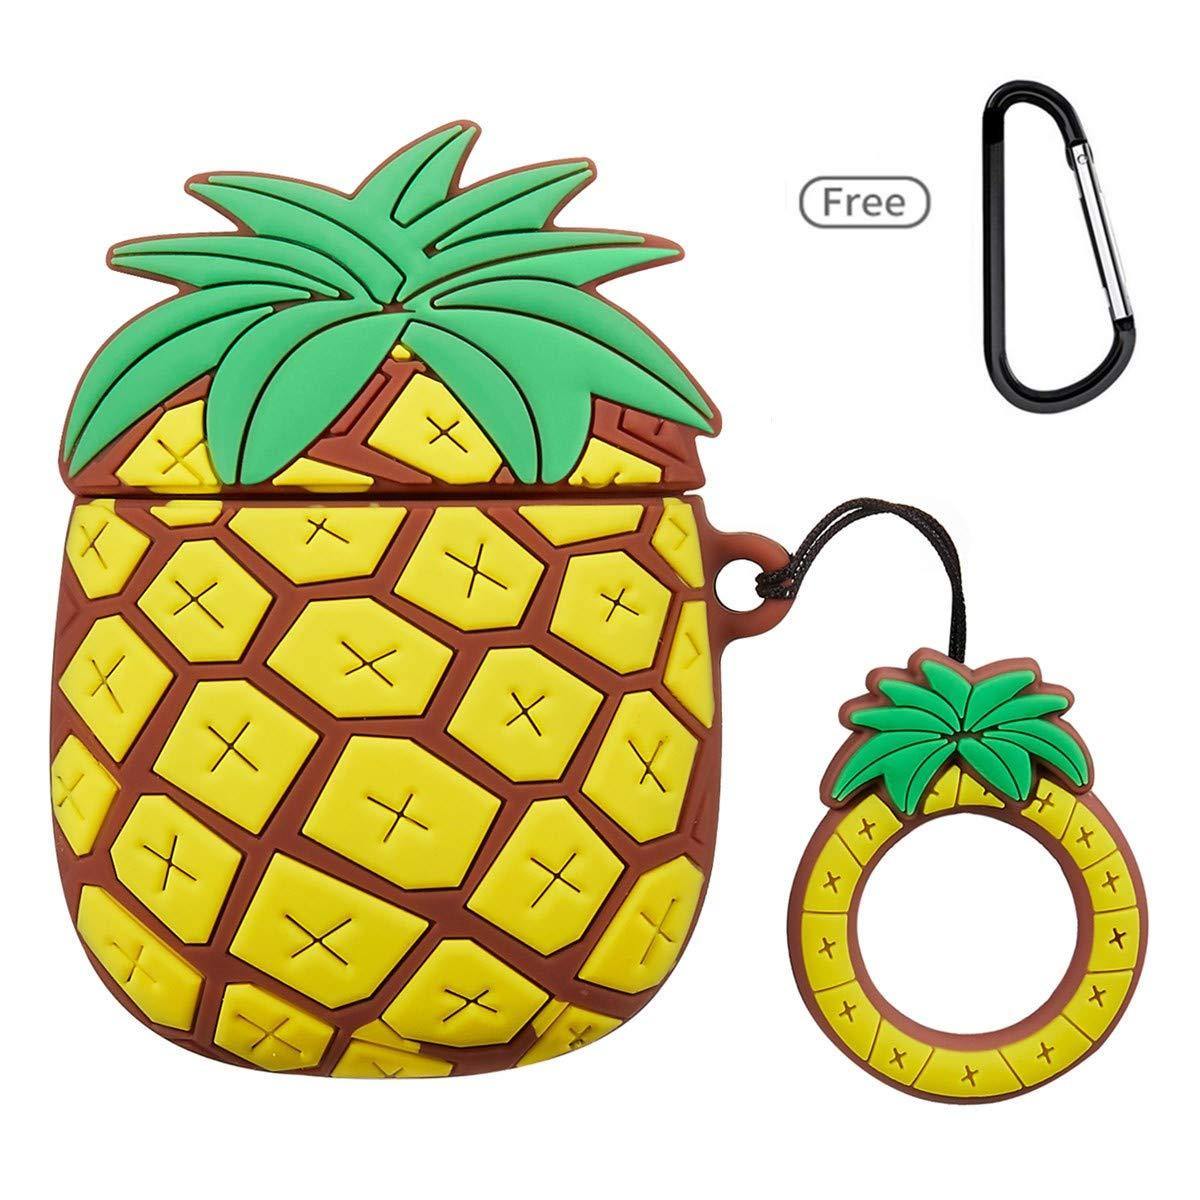 Brown Pineapple Apple Airpods Case - Lottemi